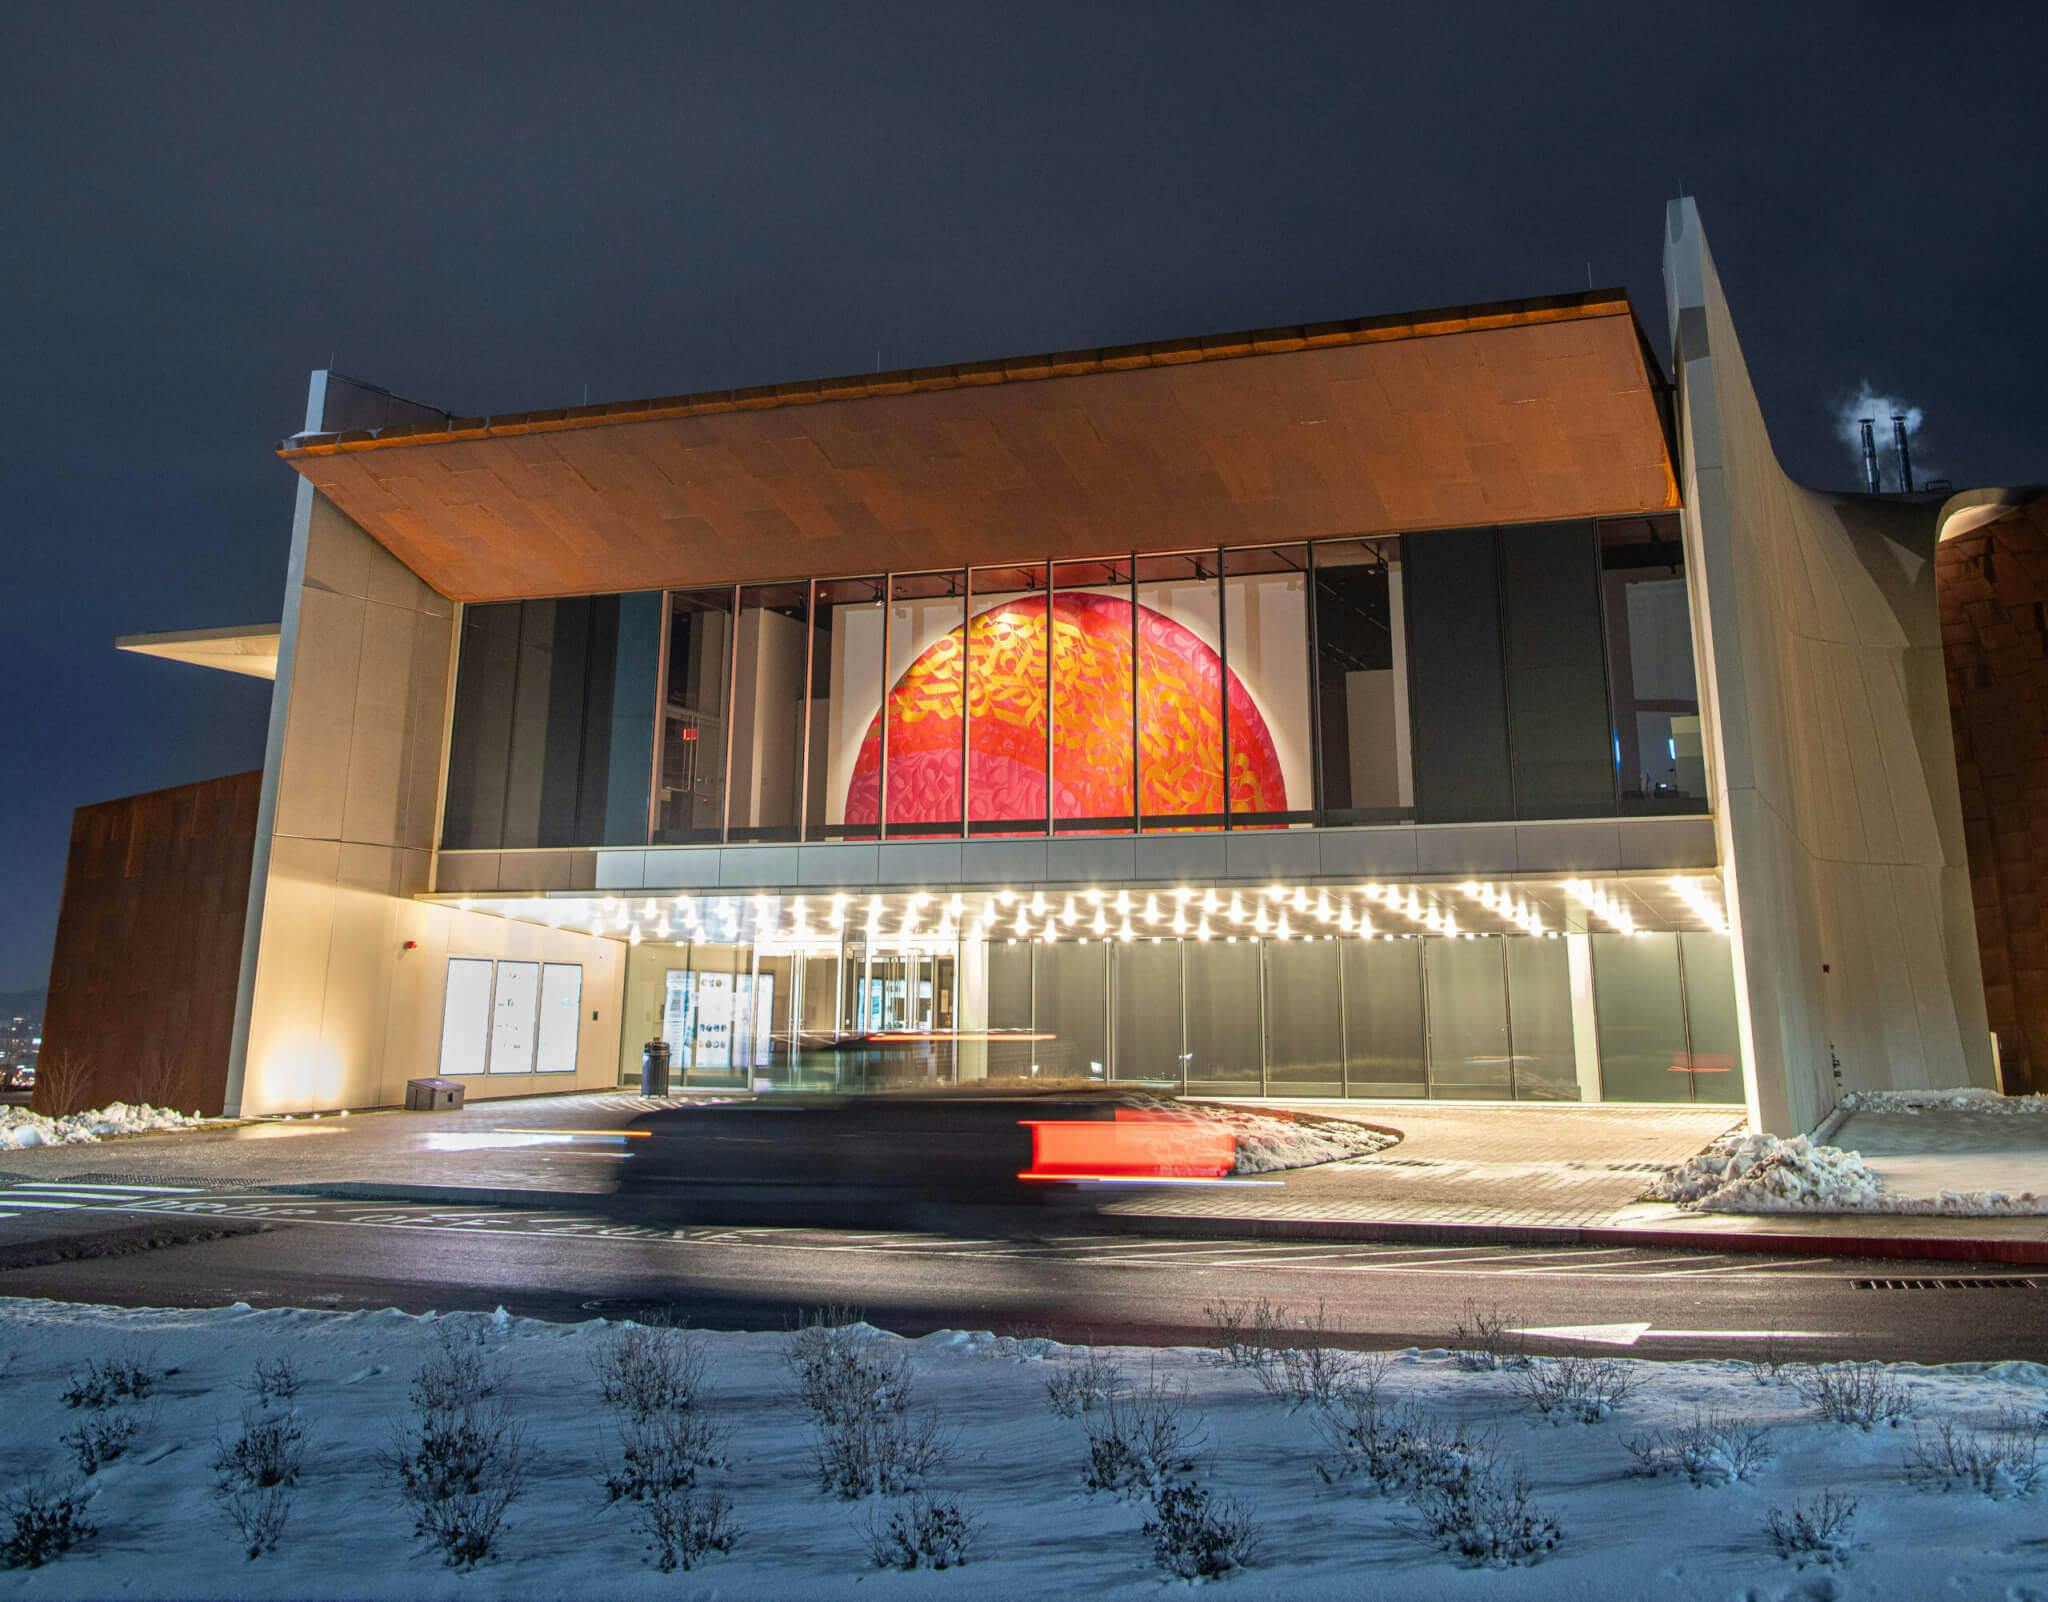 A rectangular museum exterior surrounded by small patches of snow. A ceiling of light-bulbs illuminates the entrance.